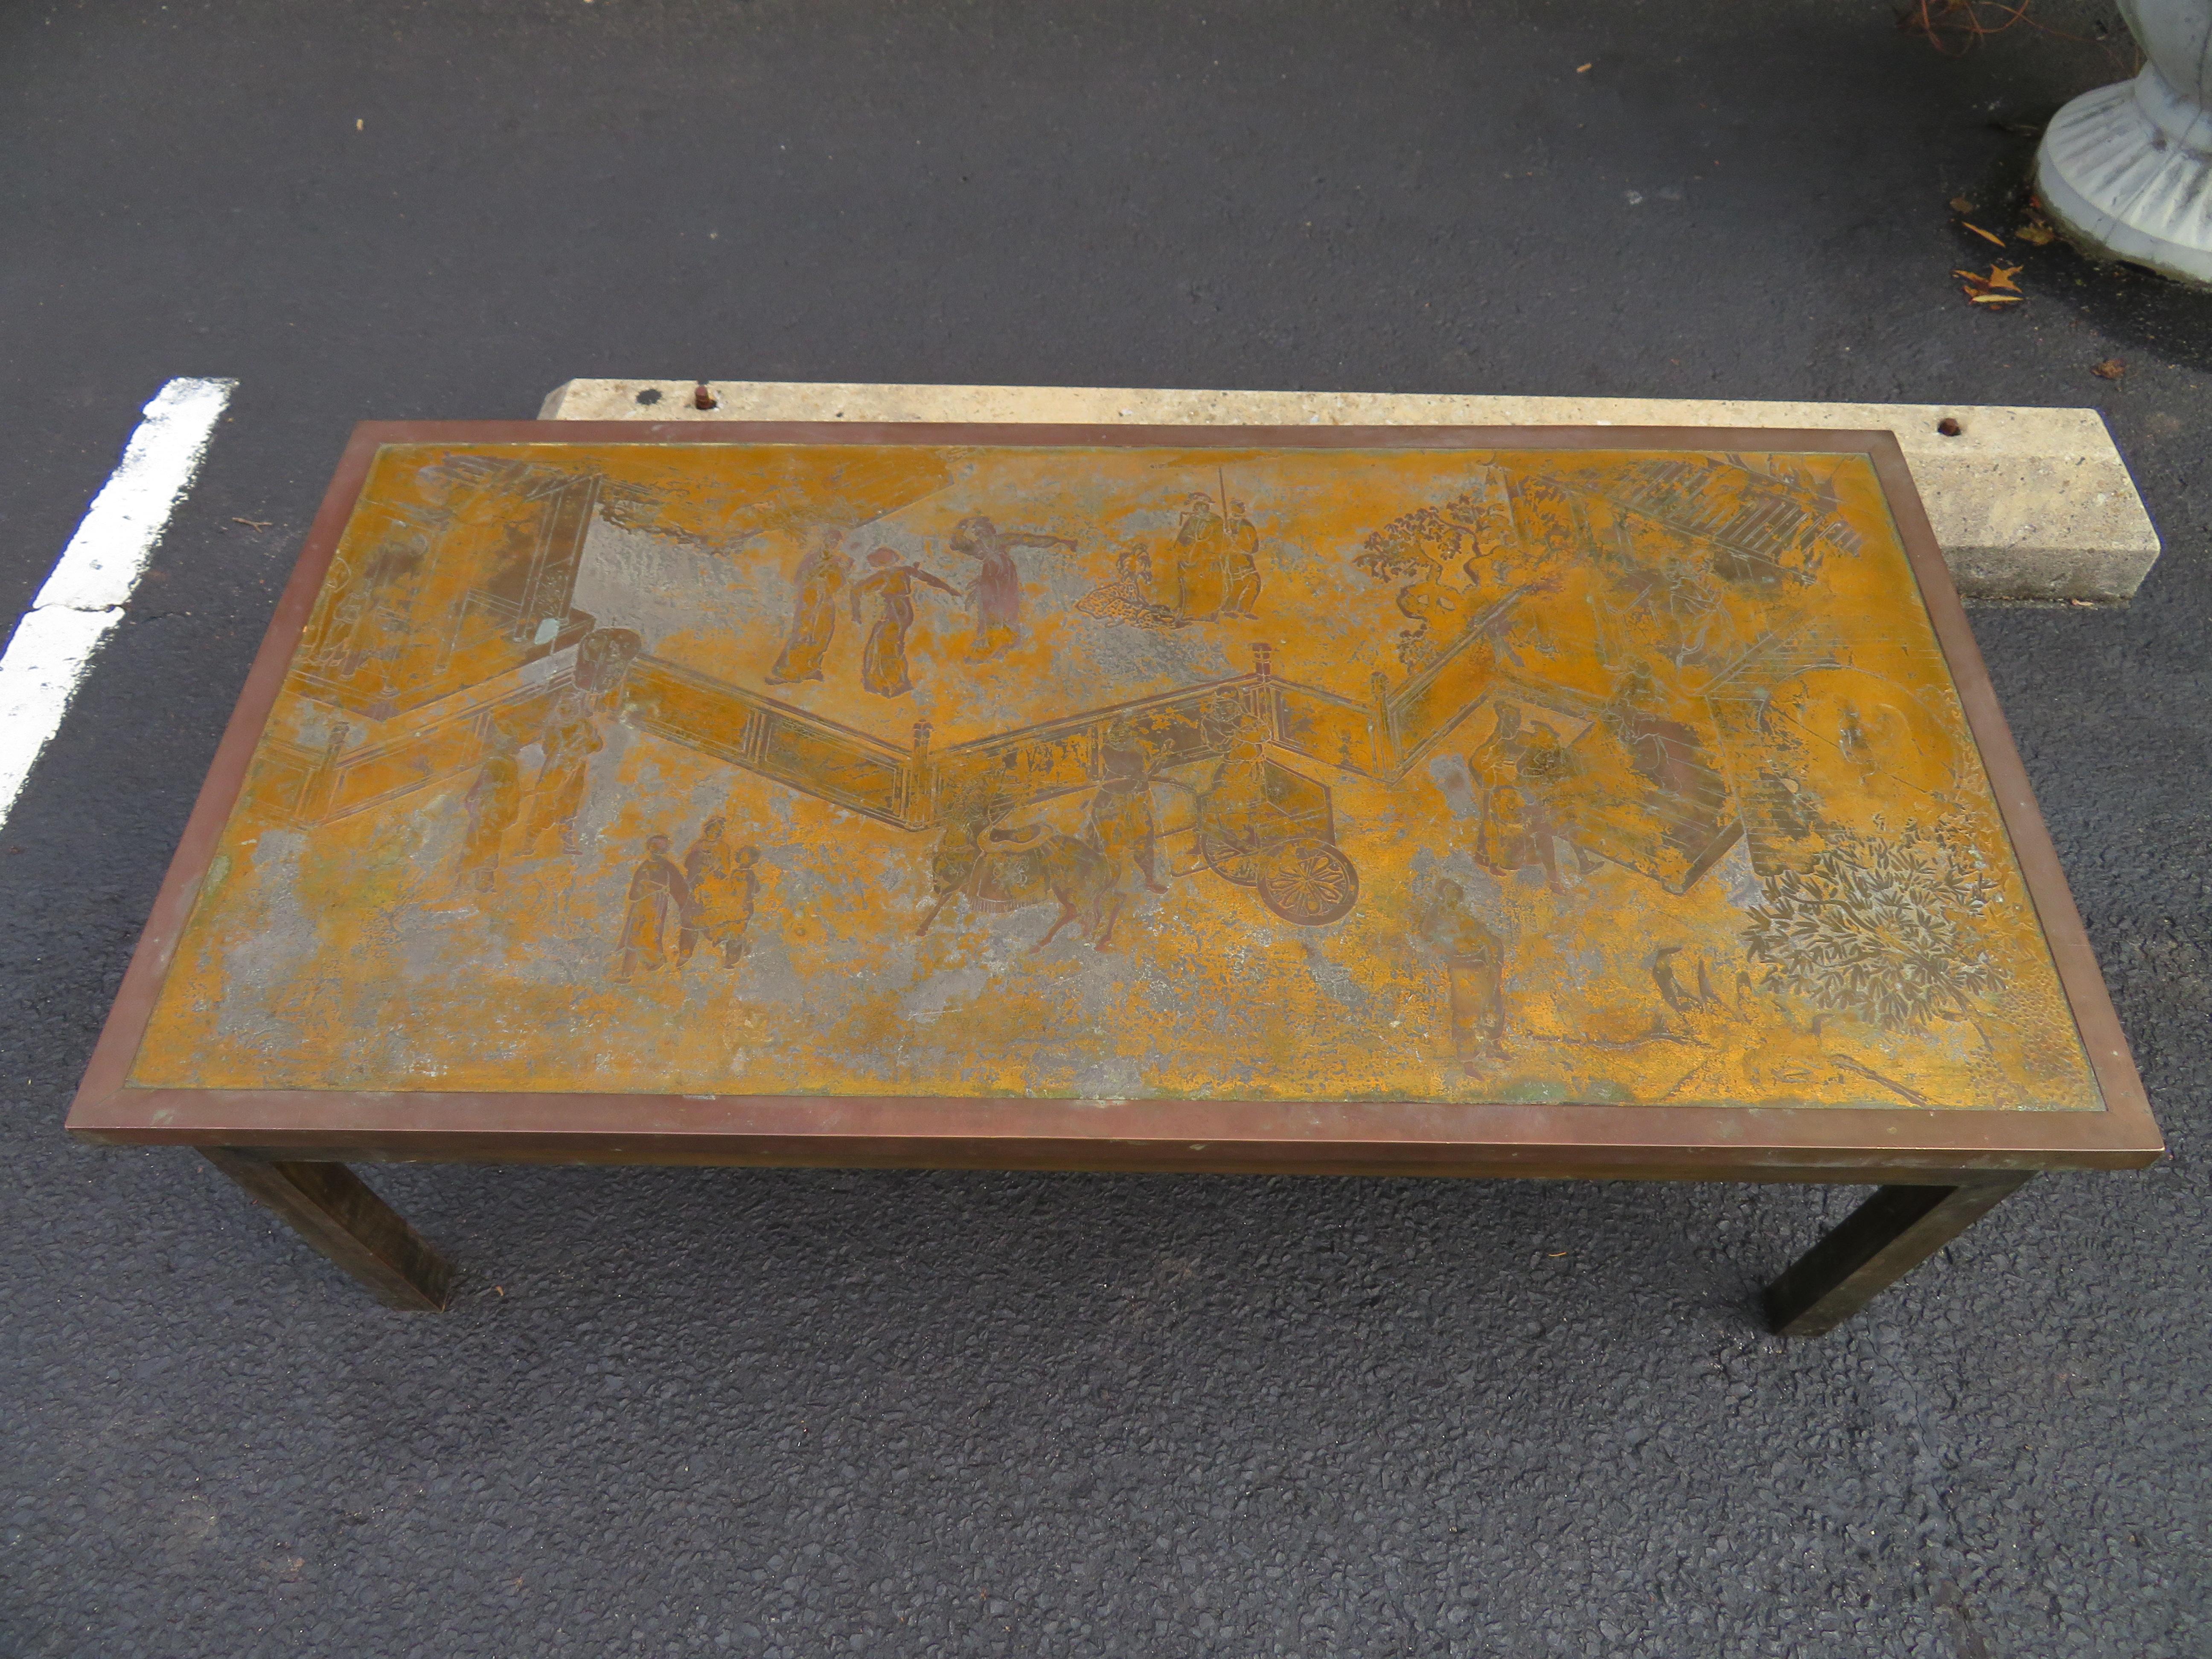 Fantastic acid etched Asian inspired coffee table, made by Phillip and Kelvin Laverne, American, circa 1970s. We love the gold and bronze colored patina mixed with shades of pewter and grey-very unusual!